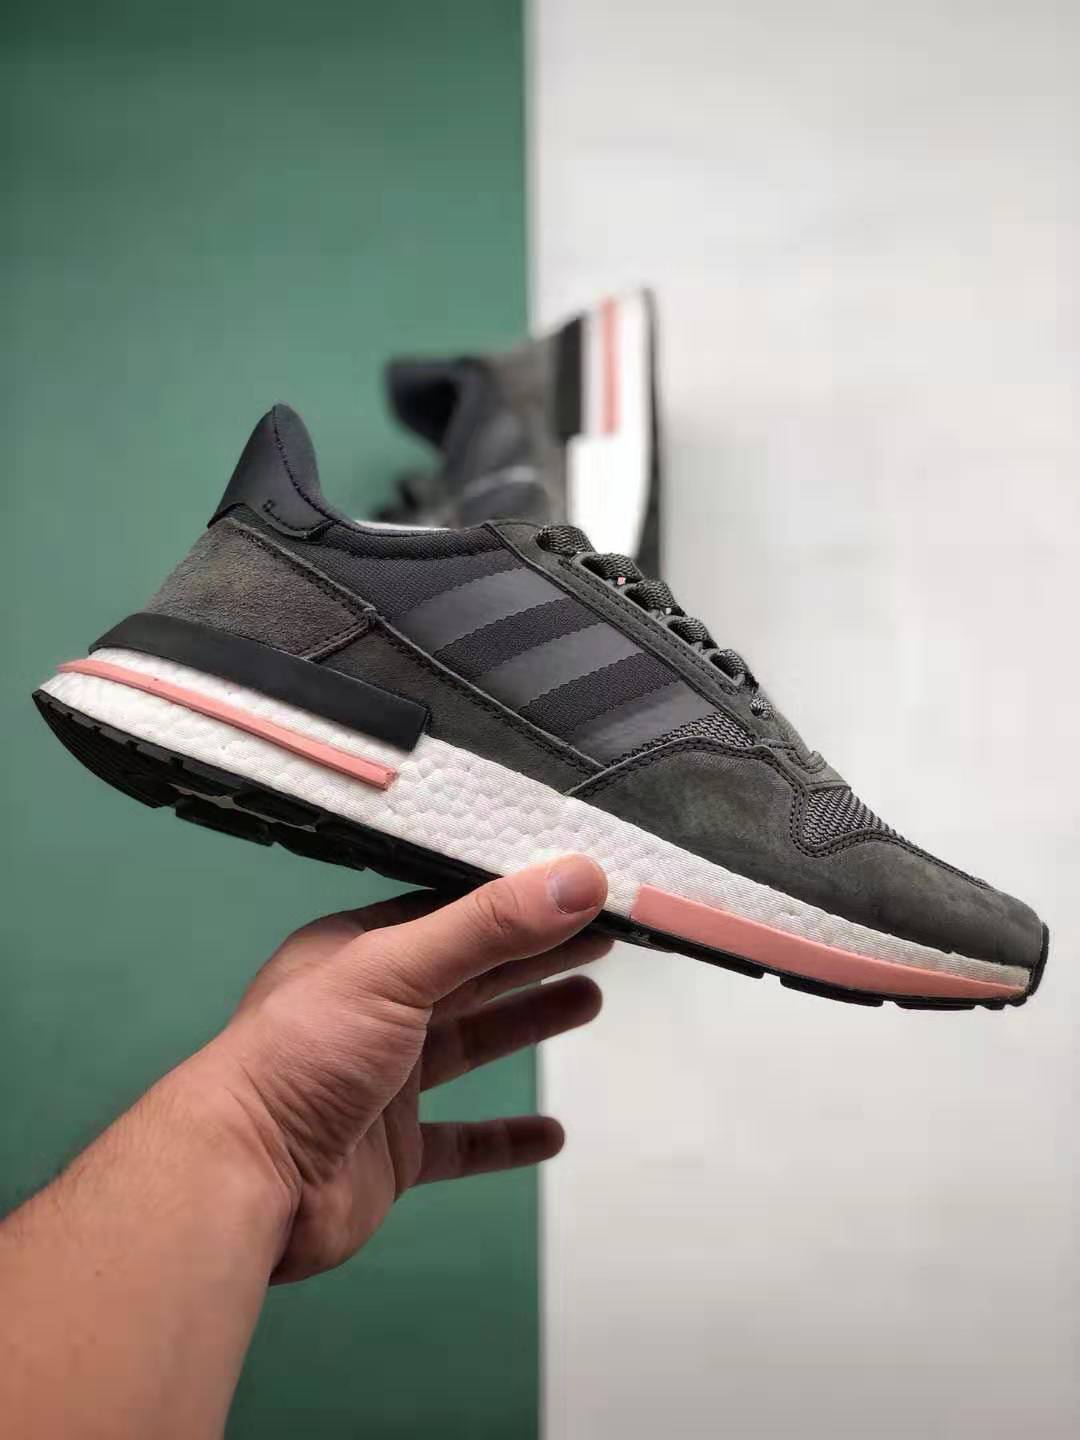 Adidas ZX 500 RM B42217 - Retro-inspired Sneakers for Modern Comfort